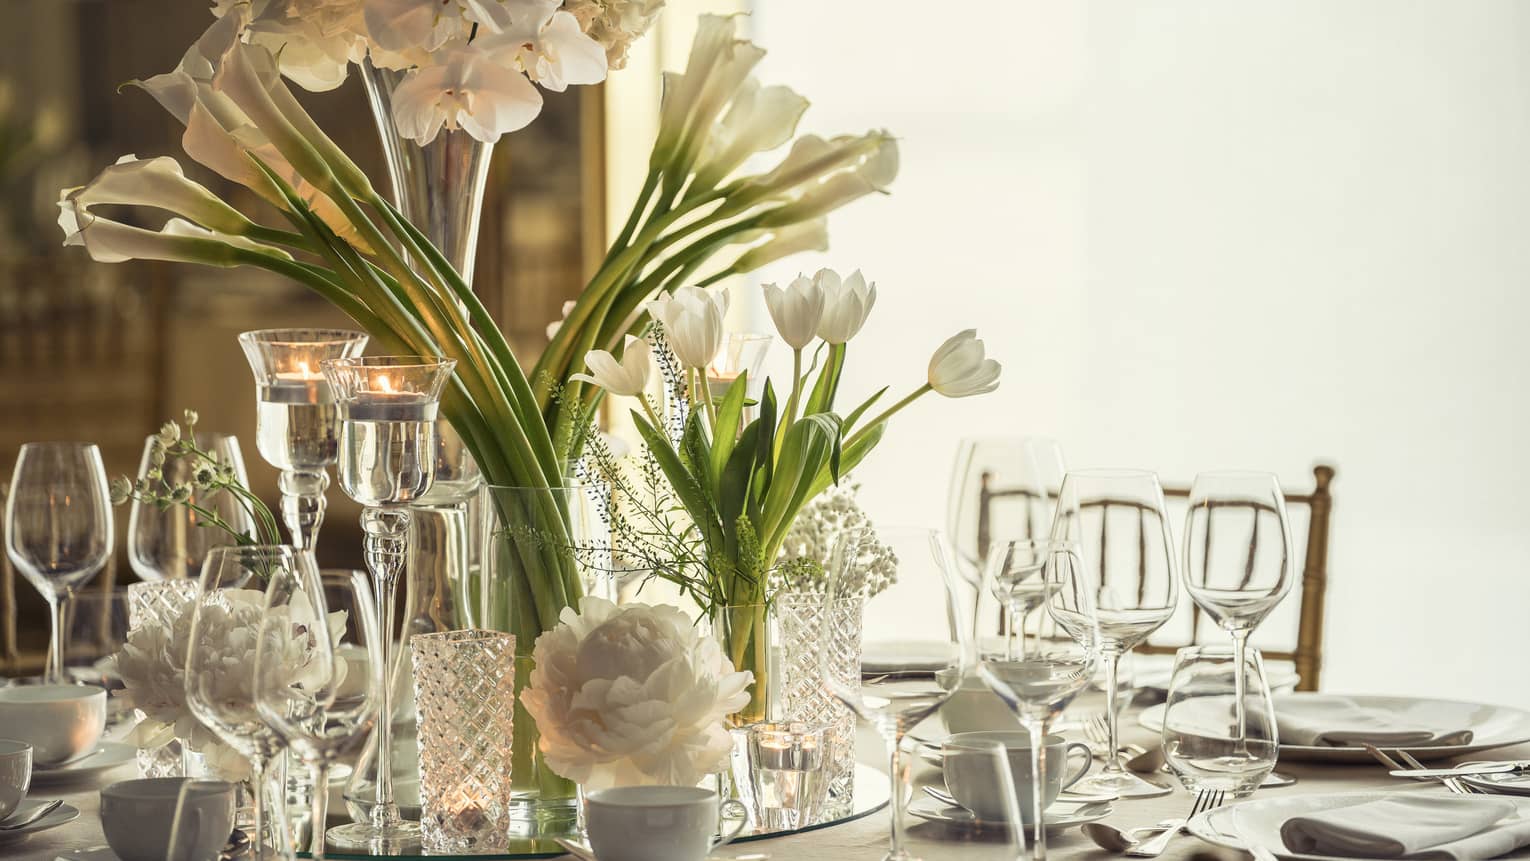 Western Banquet room dining table with glassware, long stemmed white flowers in vase